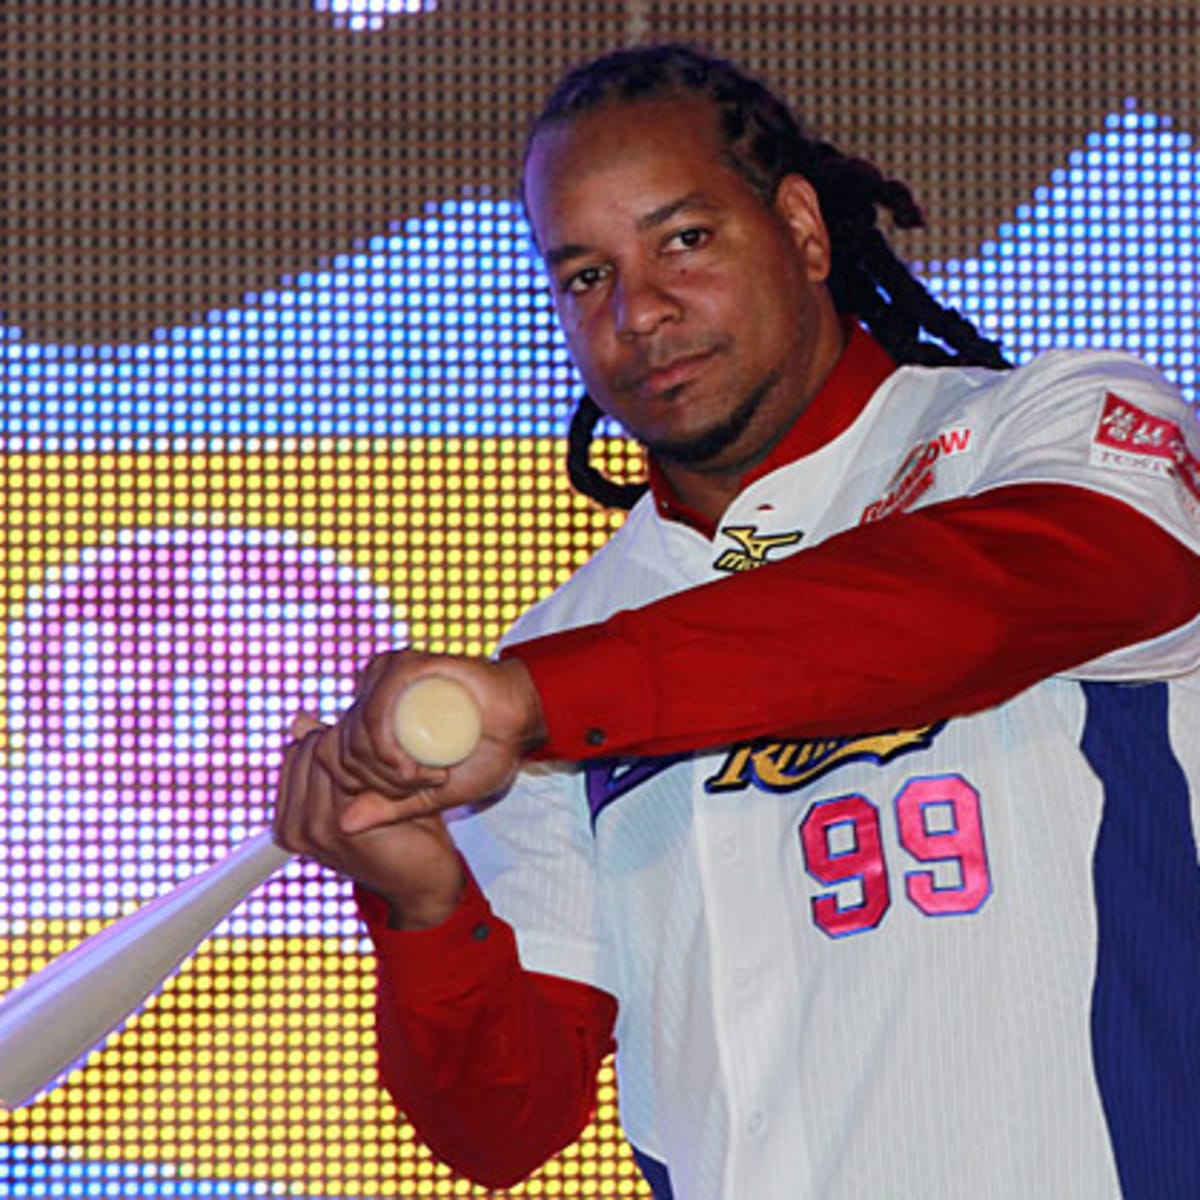 Should Manny Ramirez's jersey be retired by the Cleveland Guardians? 